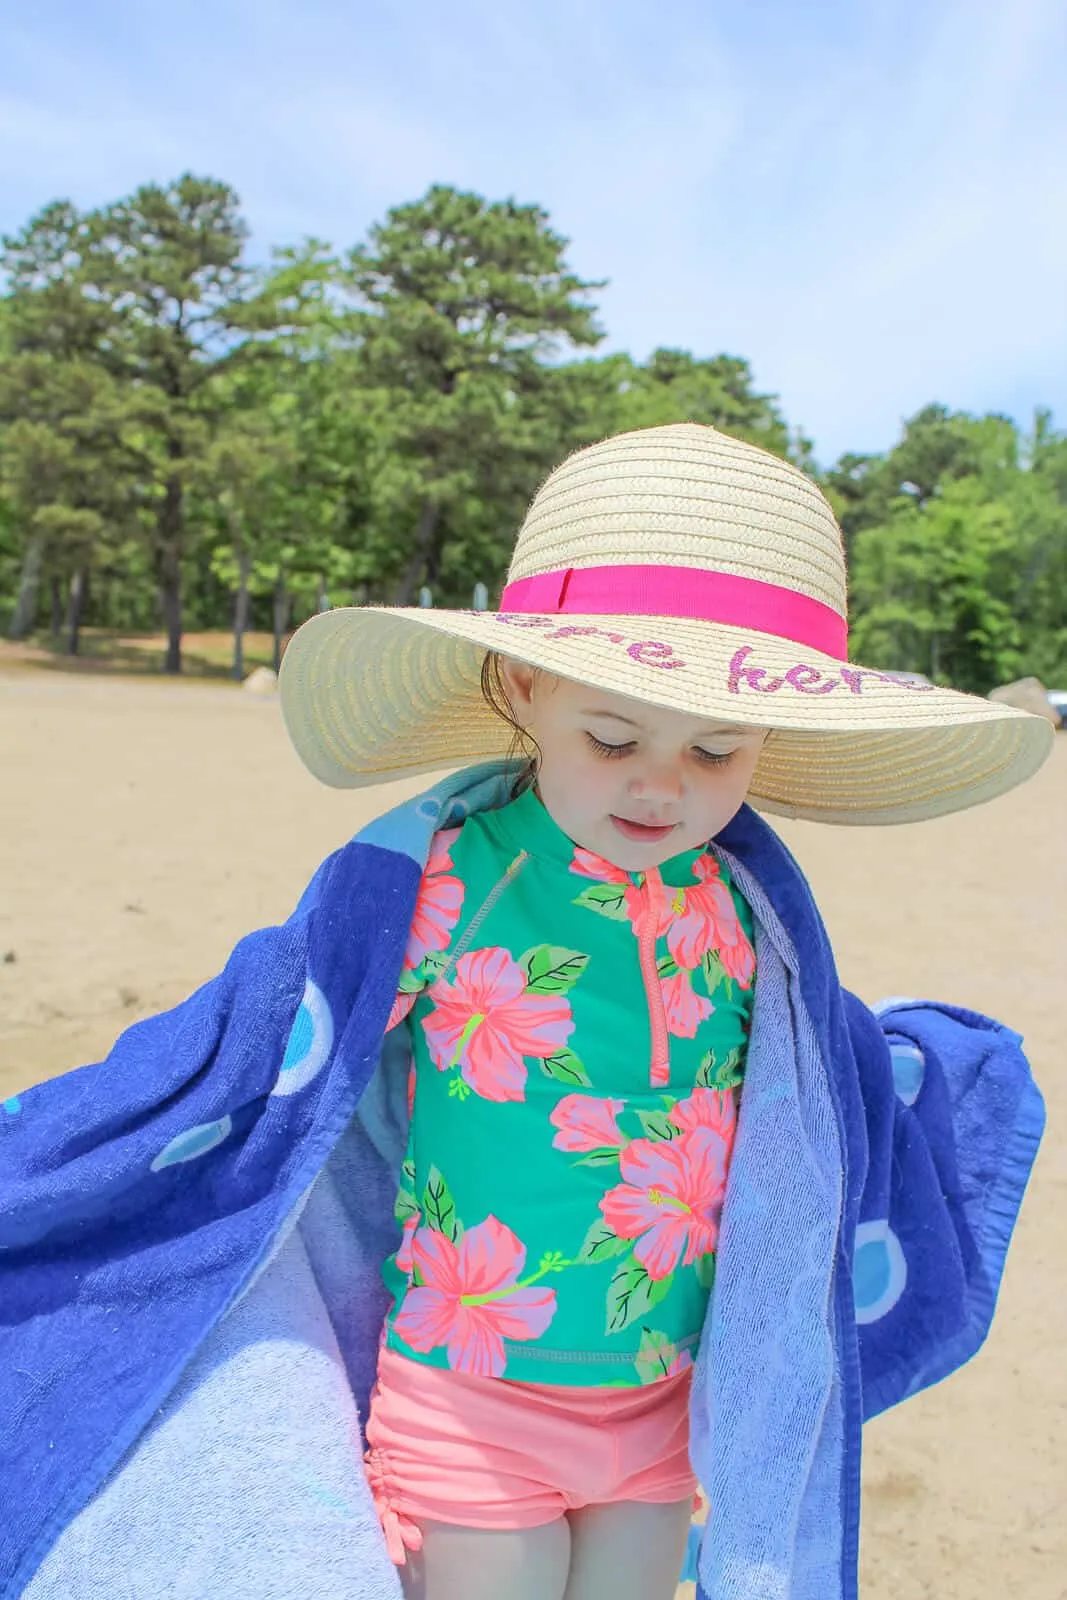 Baby wears large summer hat at beach.